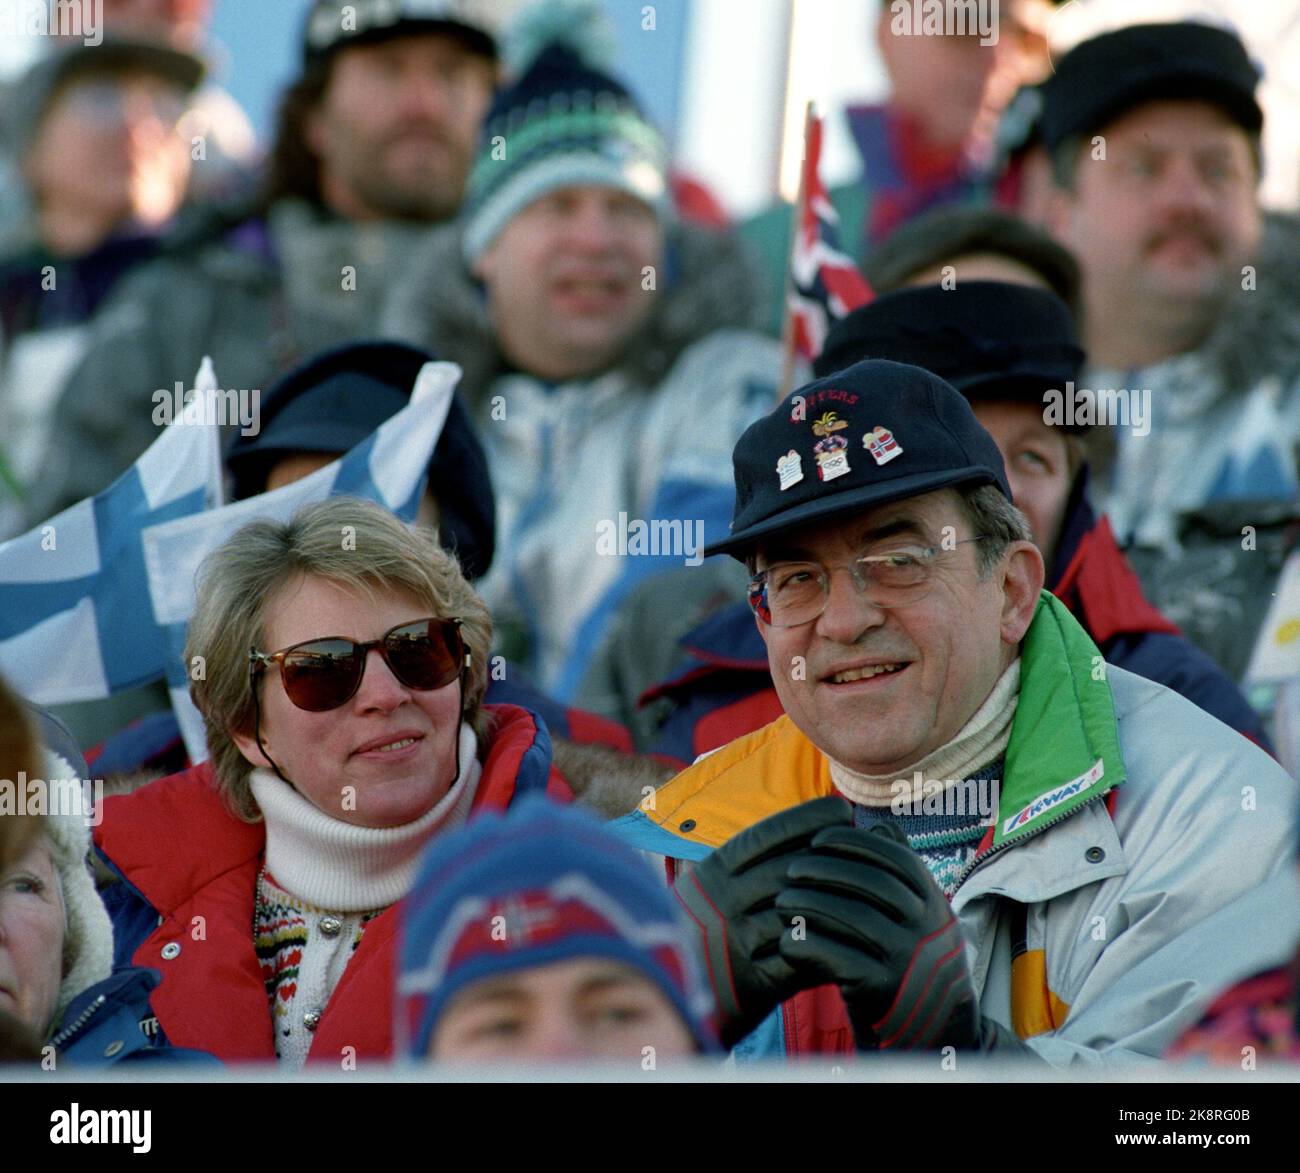 Lillehammer 19940221 Winter Olympics at Lillehammer. Relay, women 4 x 5 km. Royal at Birkebeiner Stadium. Here ex-king Constantine and ex-queen Anne Marie of Greece. Norway came in second place behind Russia and in front of Italy. Photo: Gorm Kallestad / NTB Stock Photo